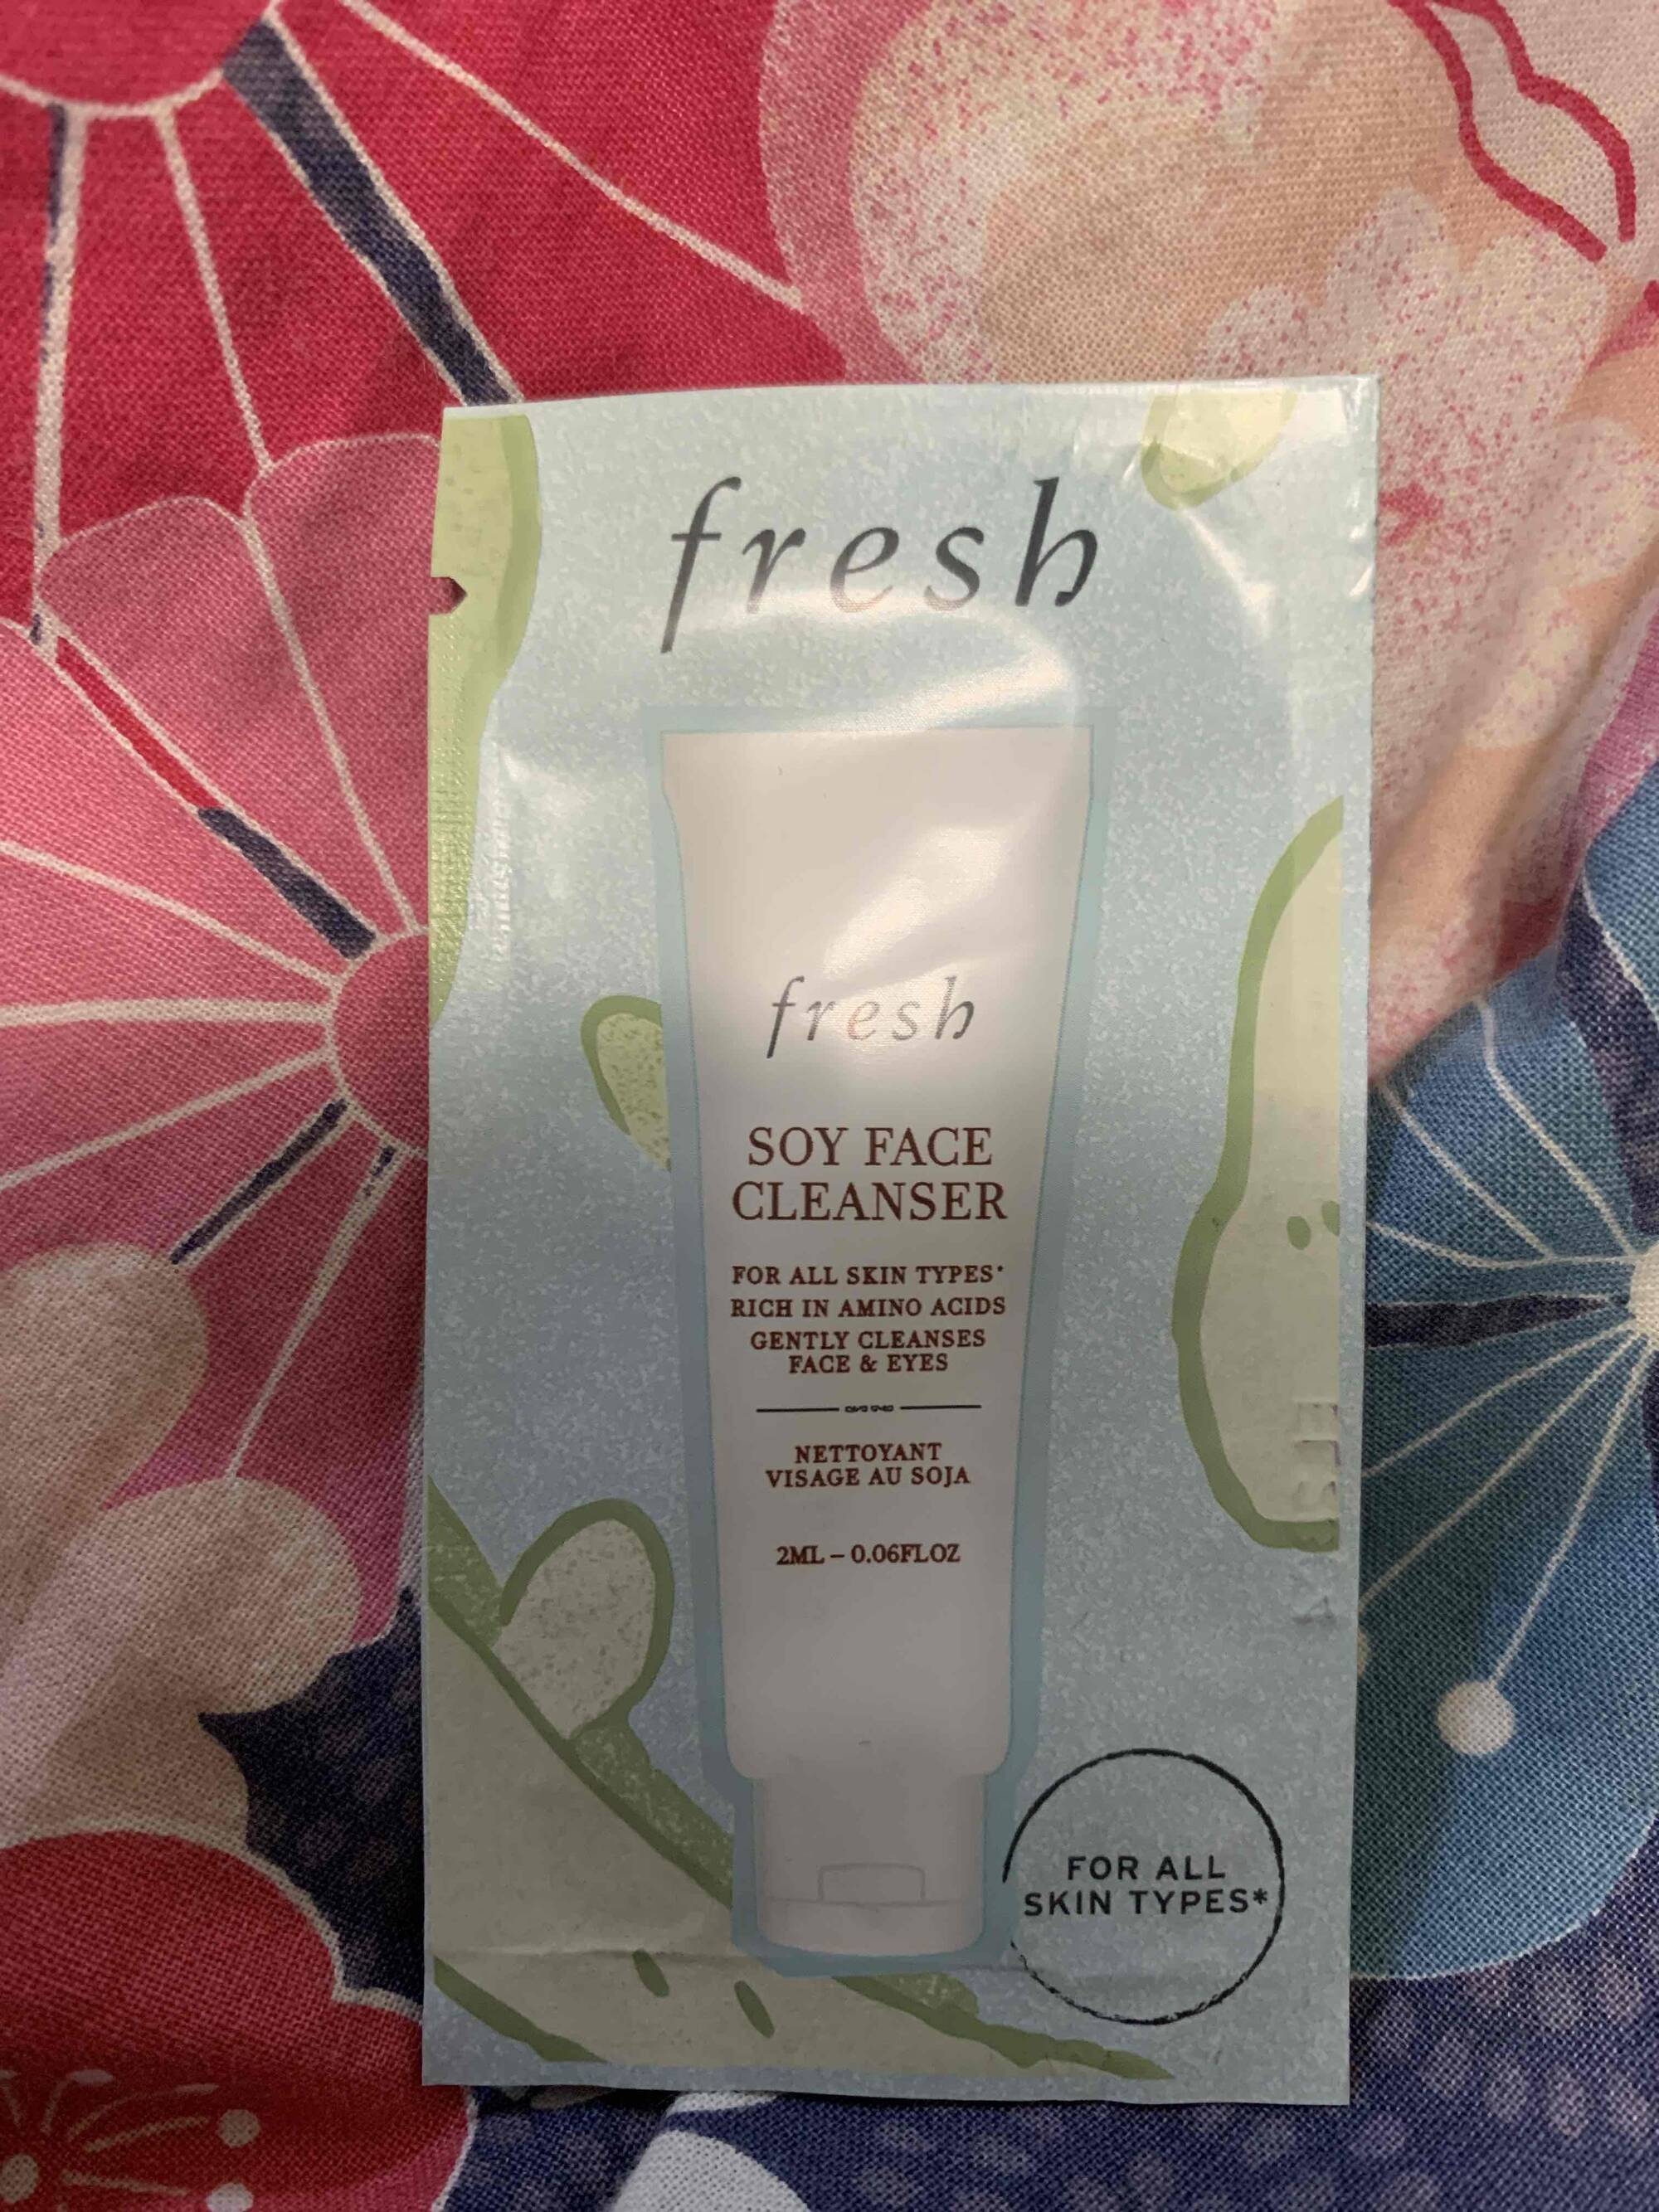 FRESH - Soy face cleanser 